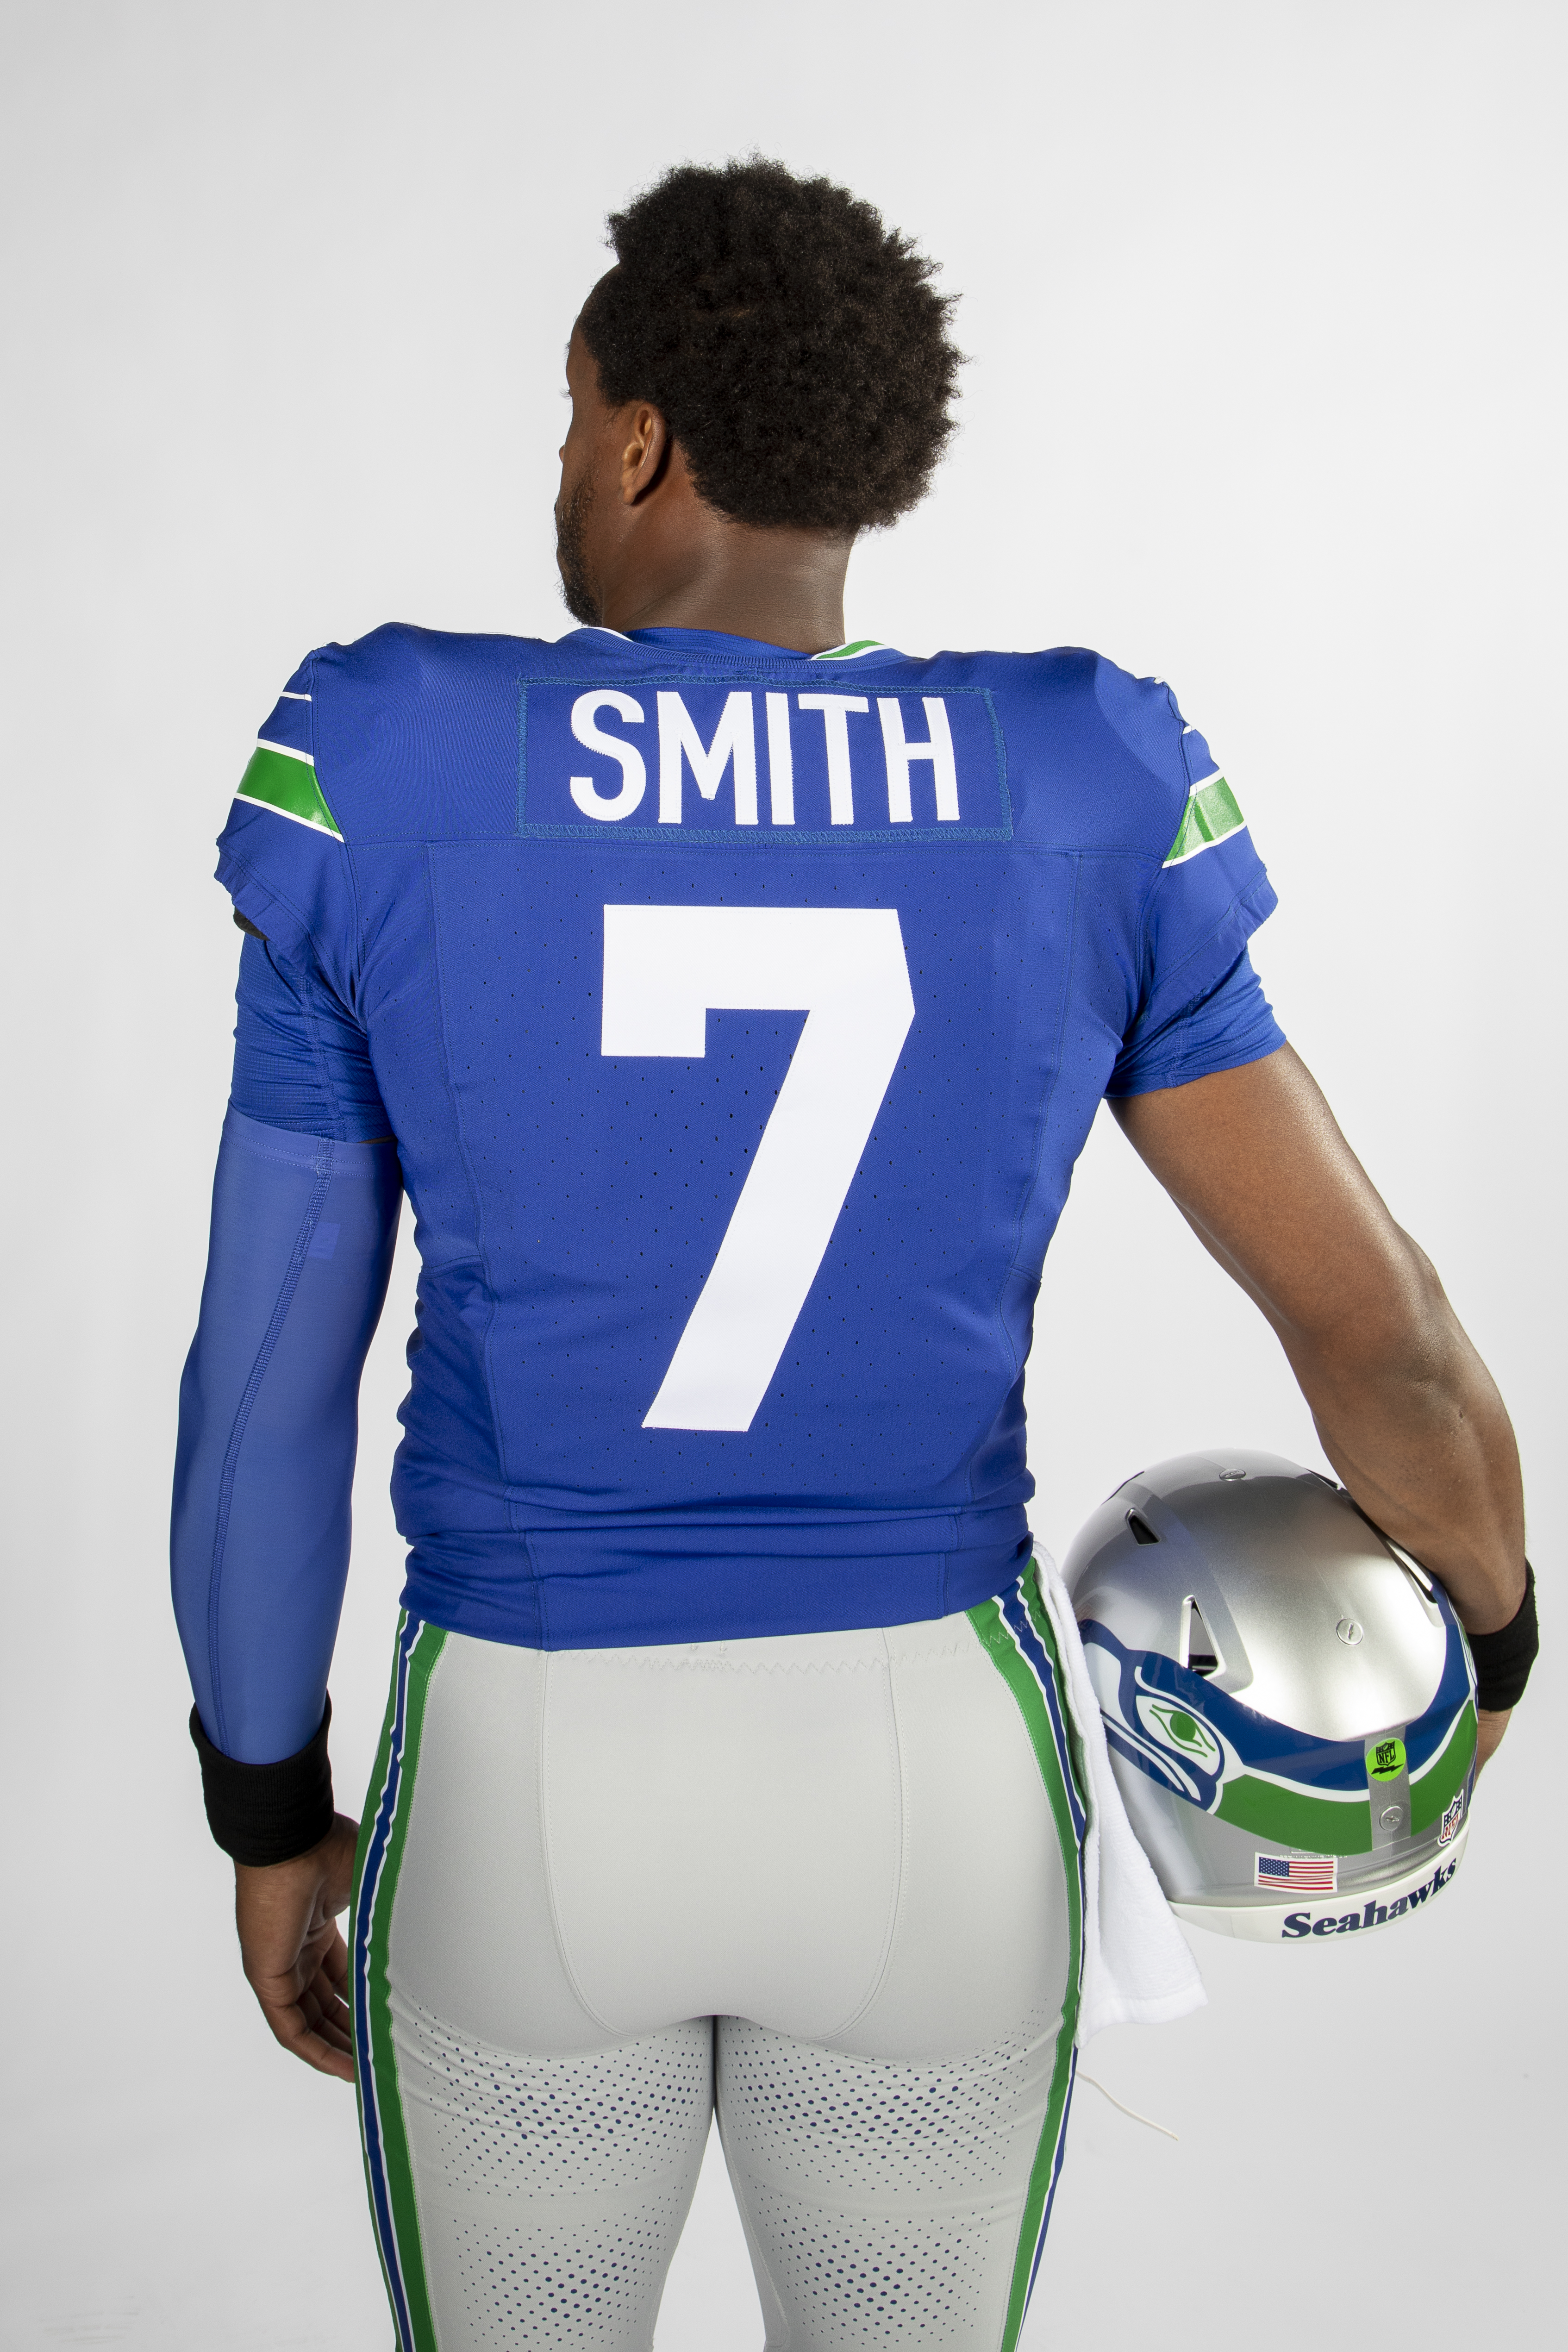 Seahawks announce the return of 1990s jerseys for the 2023 season